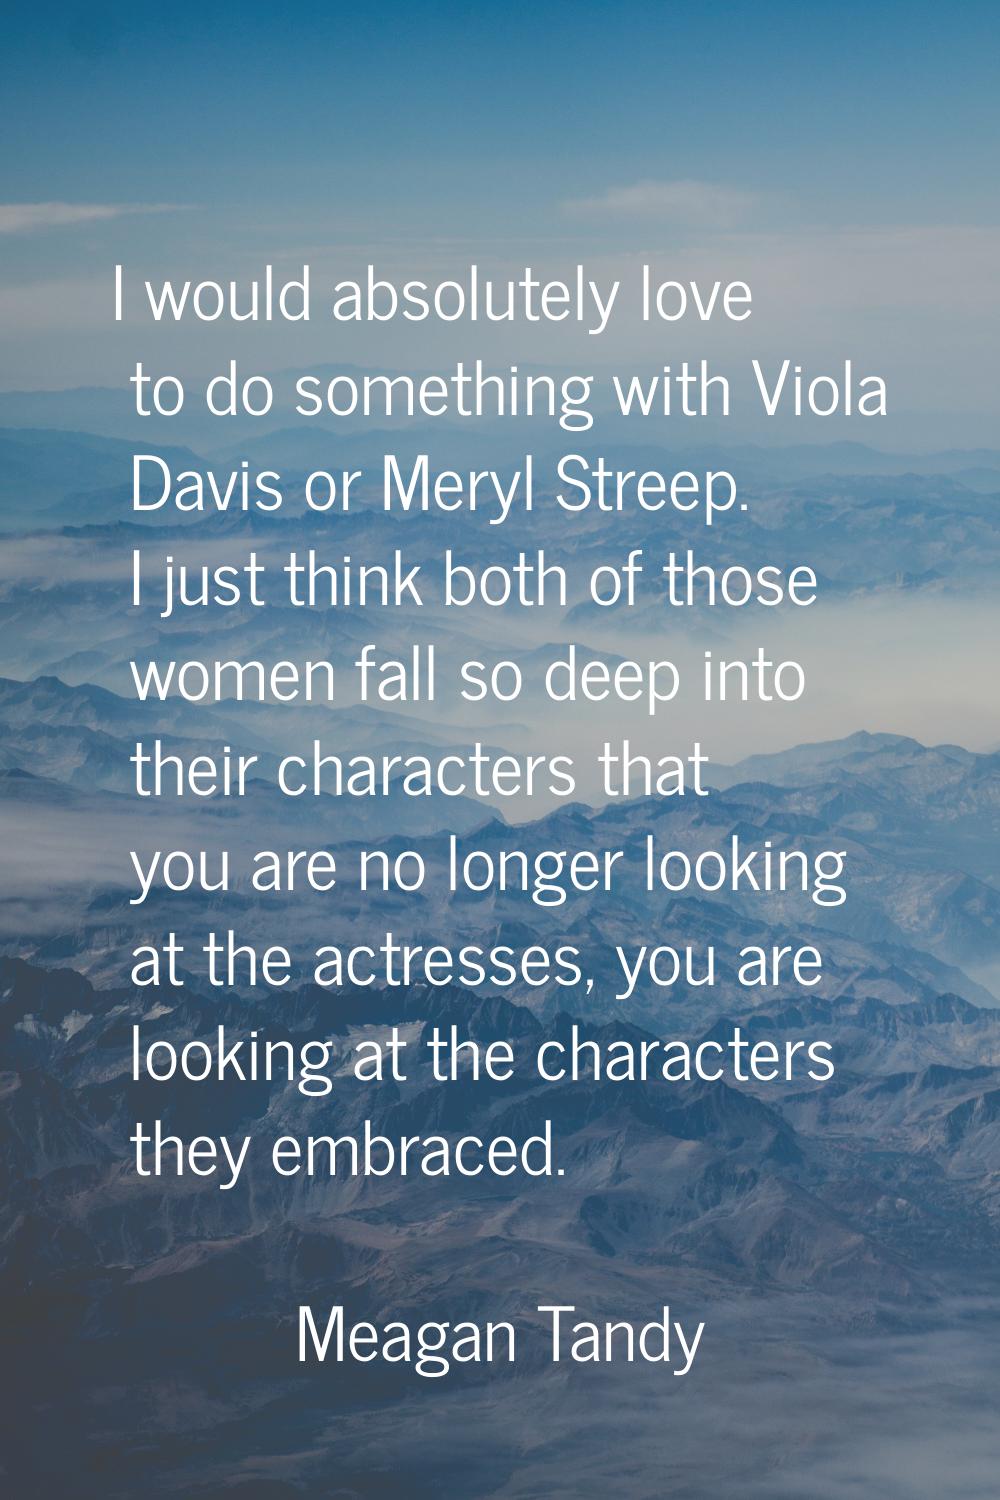 I would absolutely love to do something with Viola Davis or Meryl Streep. I just think both of thos